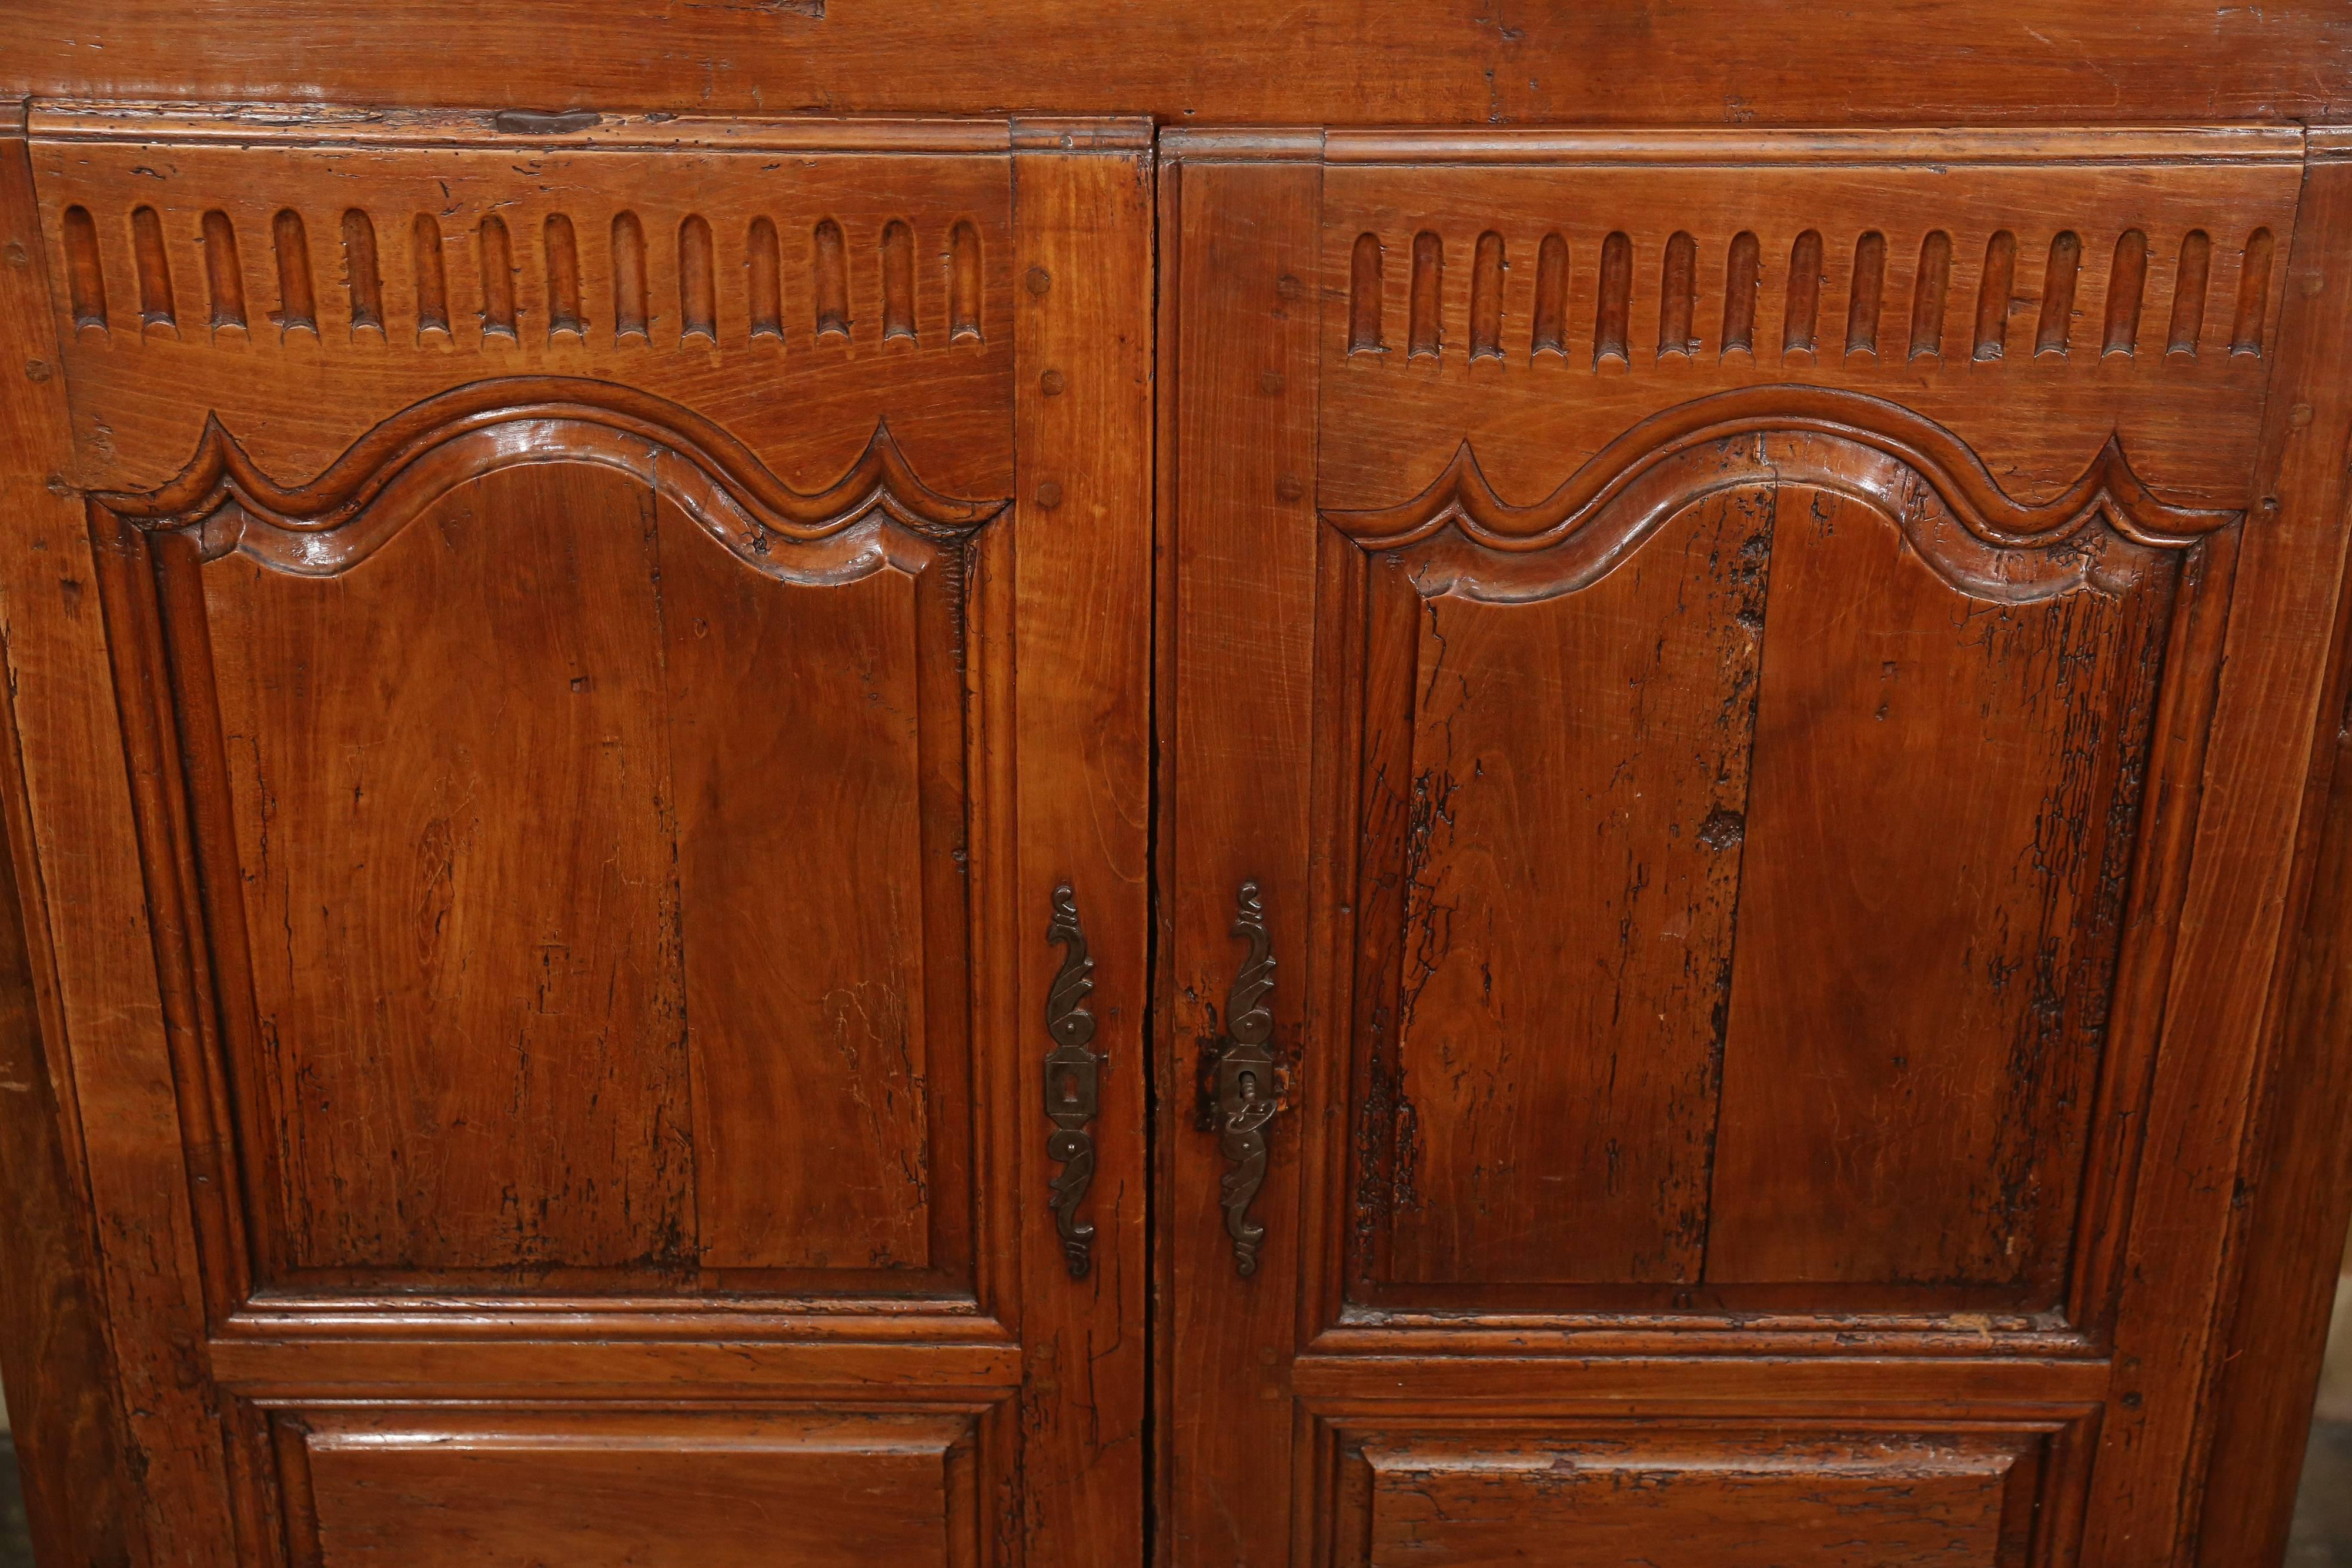 Carved chestnut cabinet has block-panel doors with a curved top panel over which has fluting and below another framed panel.

The cabinet has a curvy cut apron, in front.

Behind doors are two shelves for storage.

Sides are block panelled and